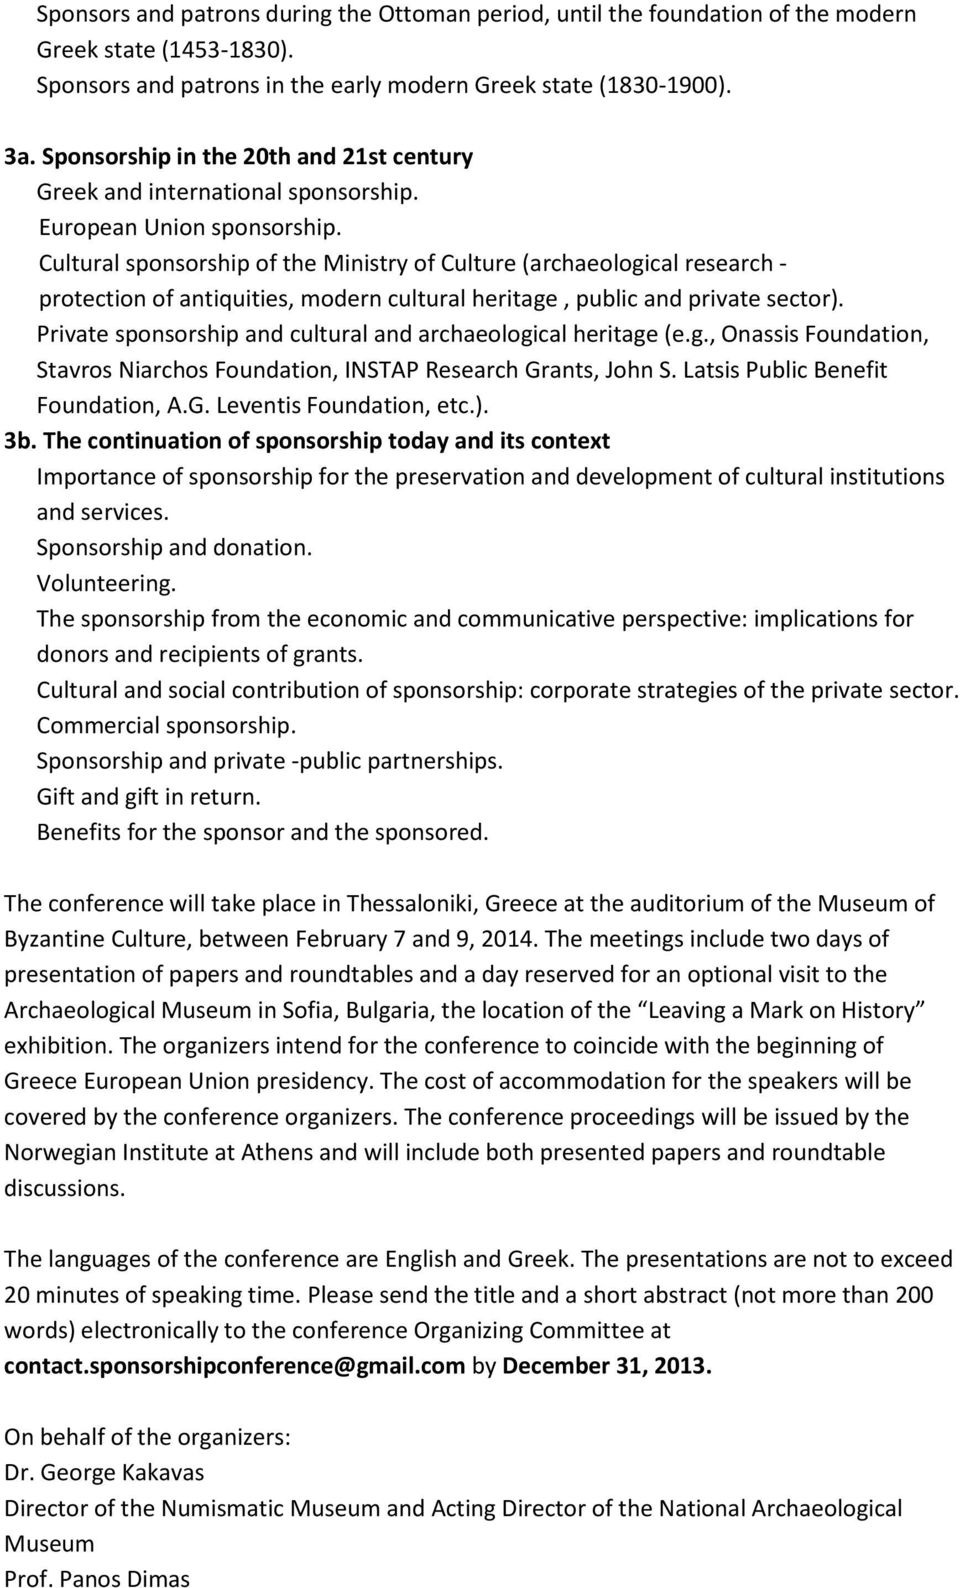 Cultural sponsorship of the Ministry of Culture (archaeological research - protection of antiquities, modern cultural heritage, public and private sector).